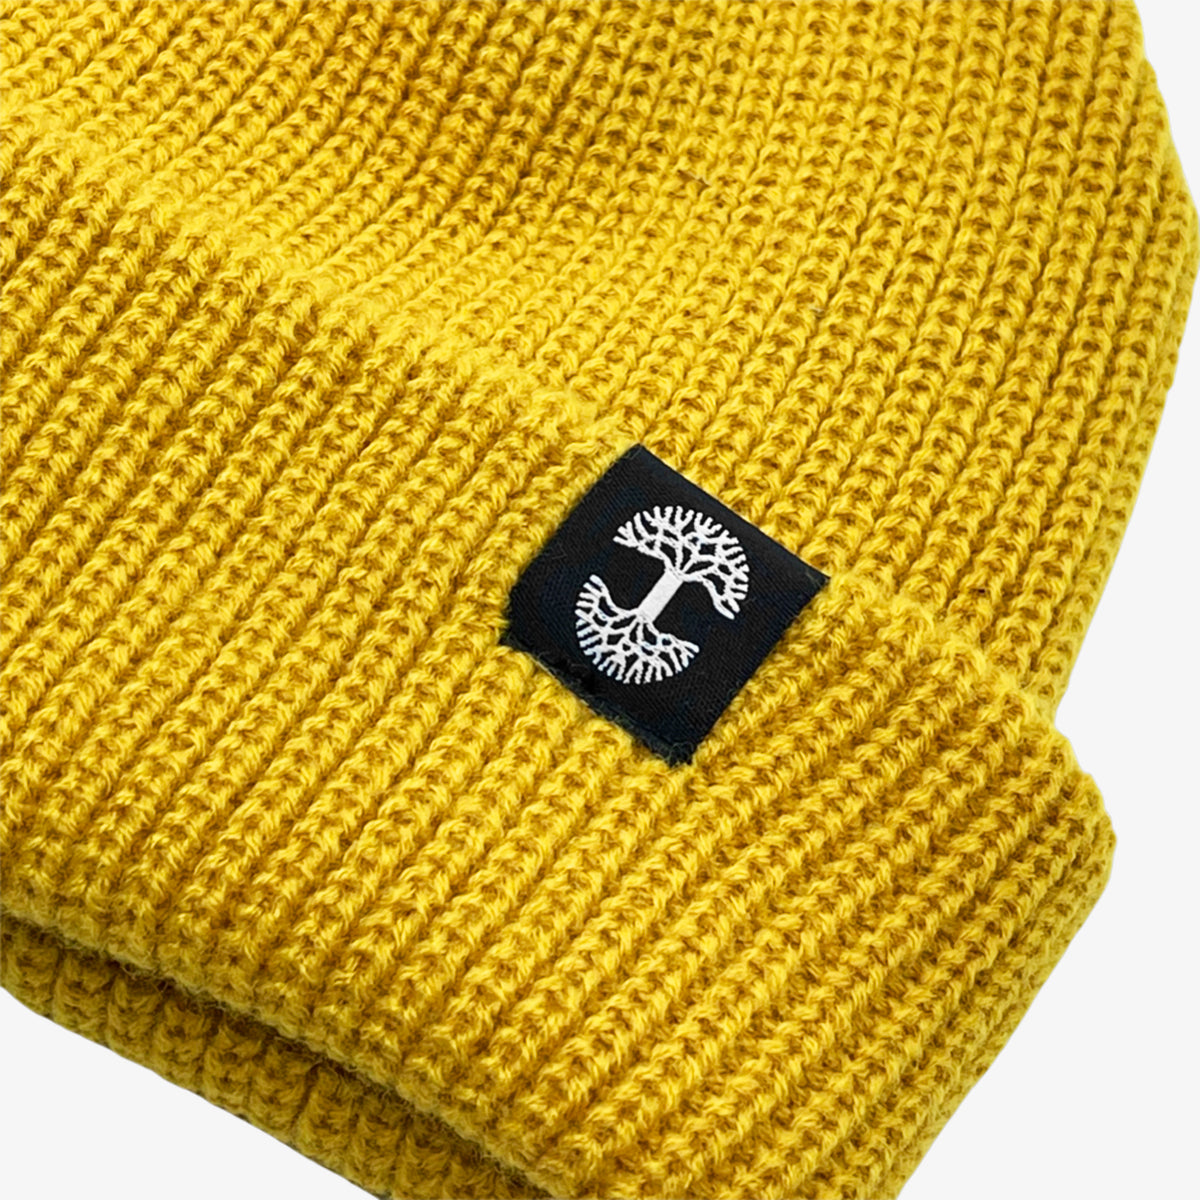 Close up of black and white Oaklandish tree logo tag on the left wear side of a shallow fit mustard yellow cuffed beanie.